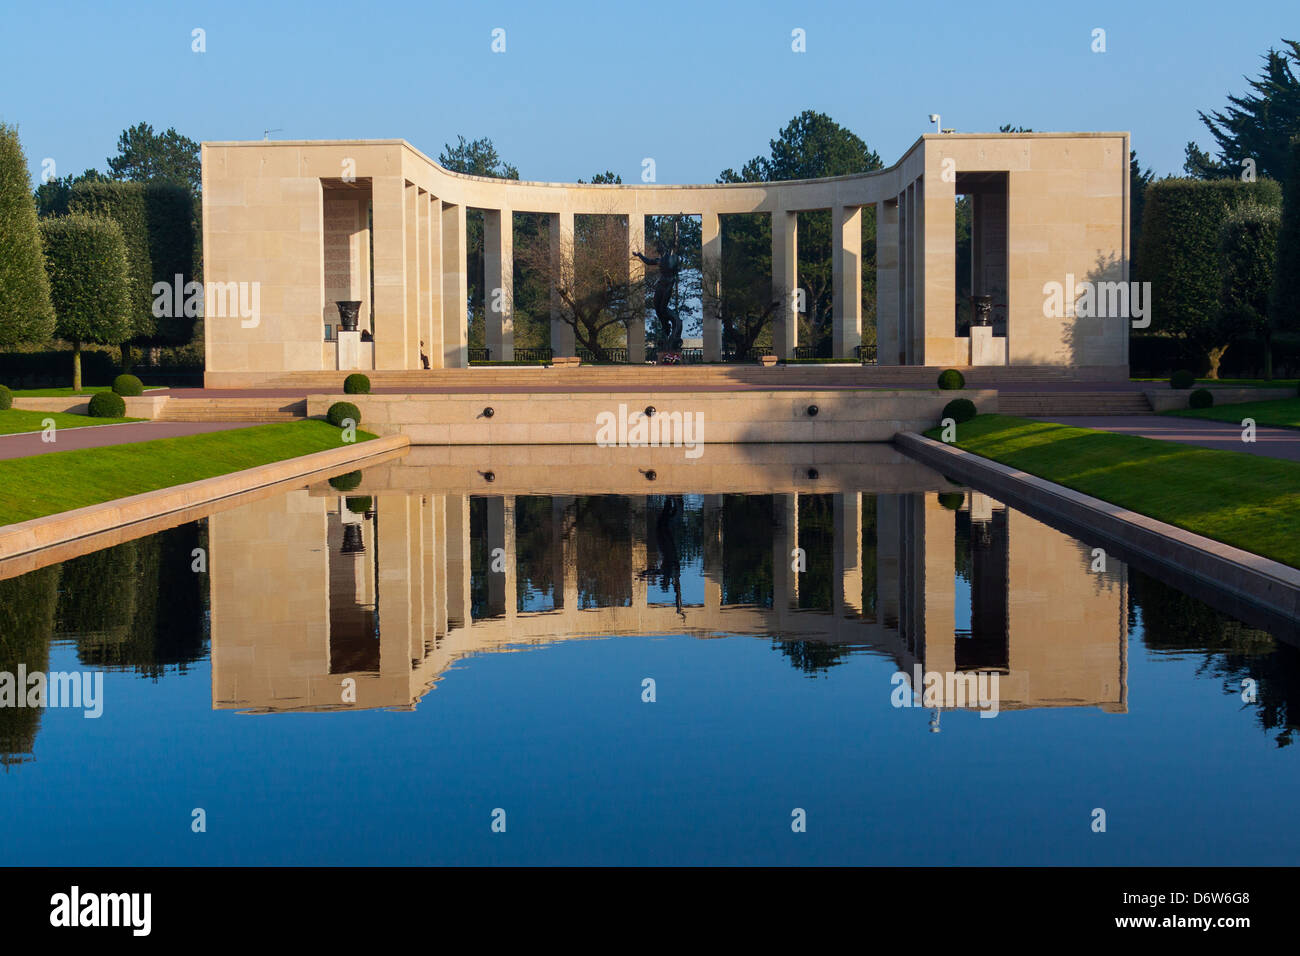 American Cemetery memorial of second war (1939-1945), in Coleville-Sur-Mer, Normandy France Stock Photo